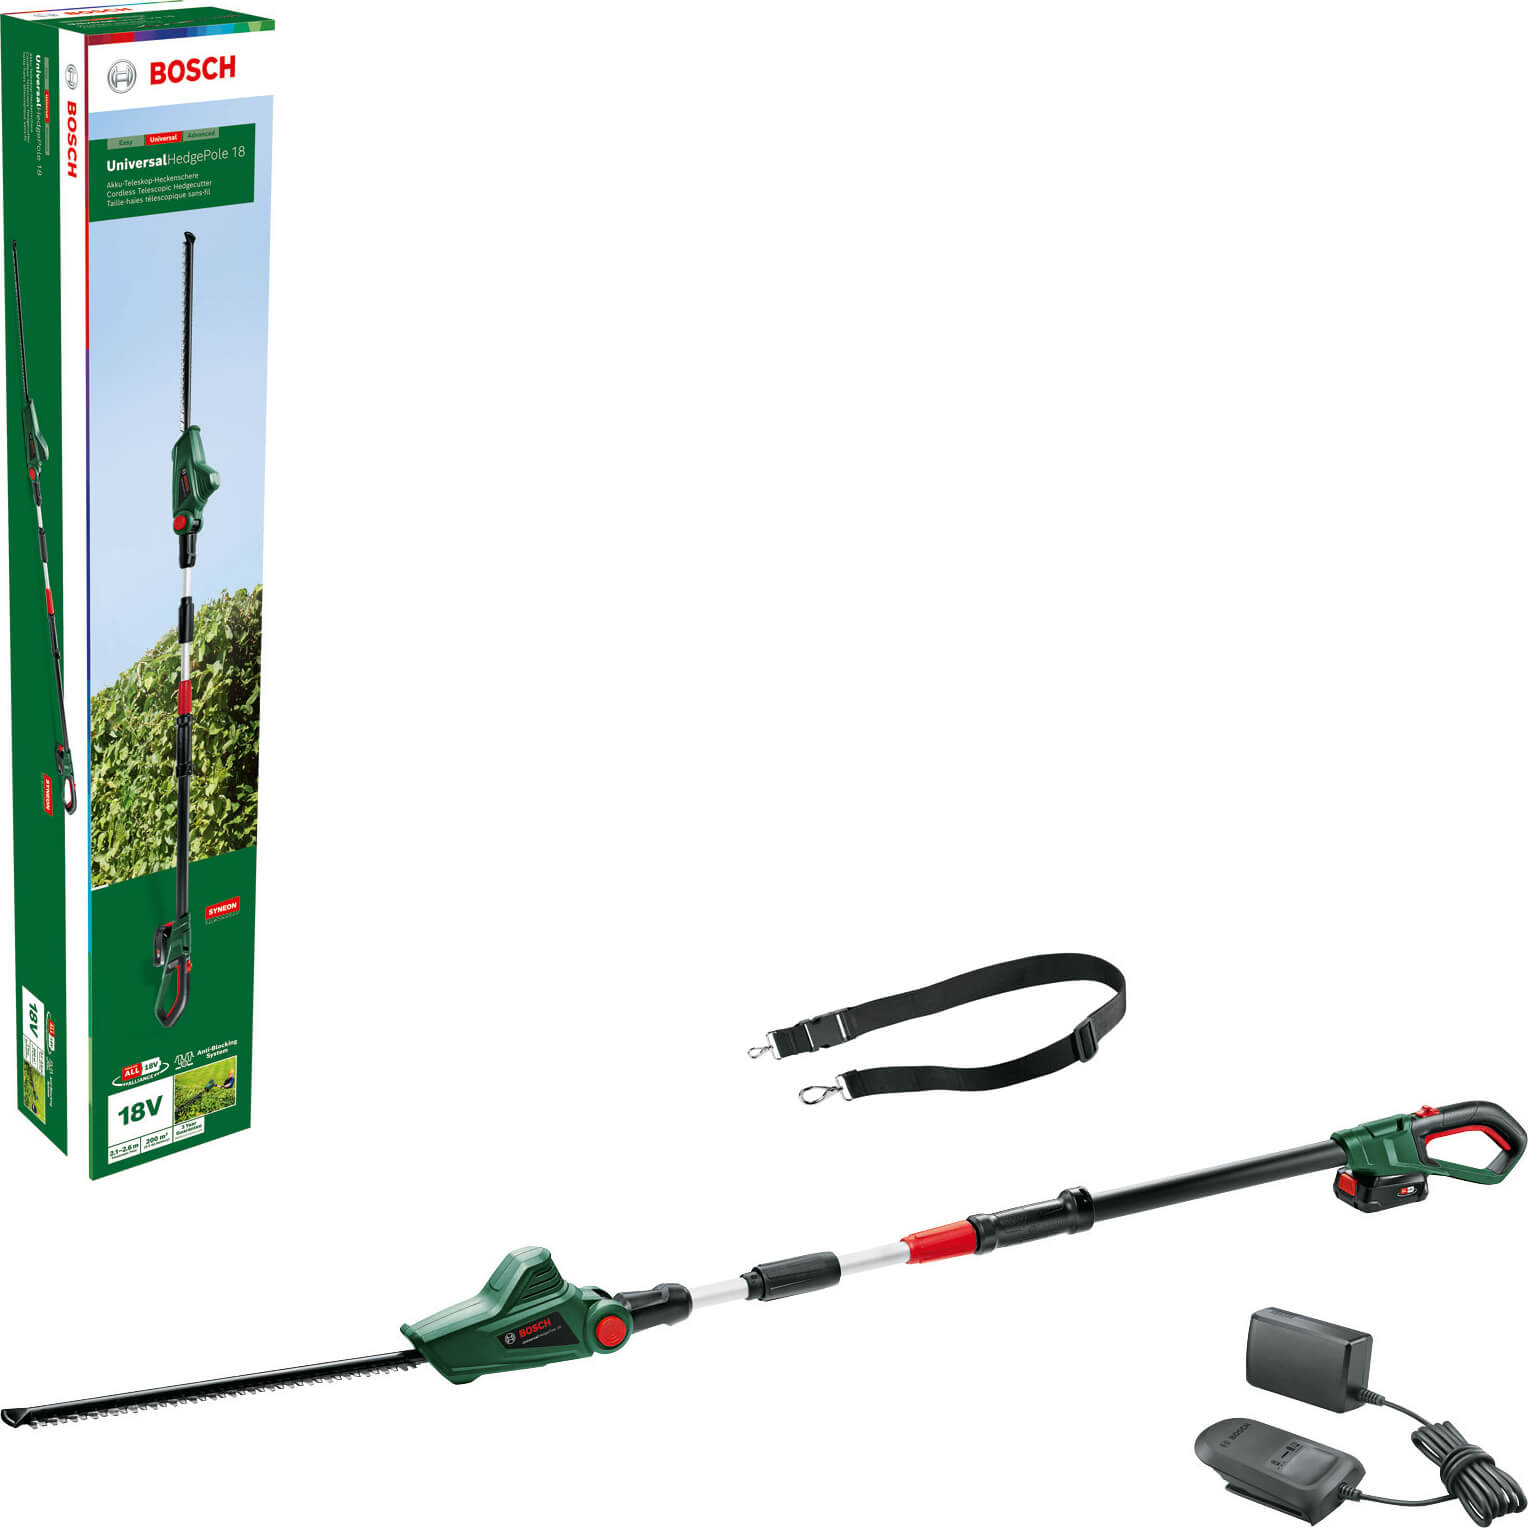 Image of Bosch UNIVERSALHEDGEPOLE 18v Cordless Telescopic Pole Hedge Trimmer 430mm 1 x 2.5ah Li-ion Charger